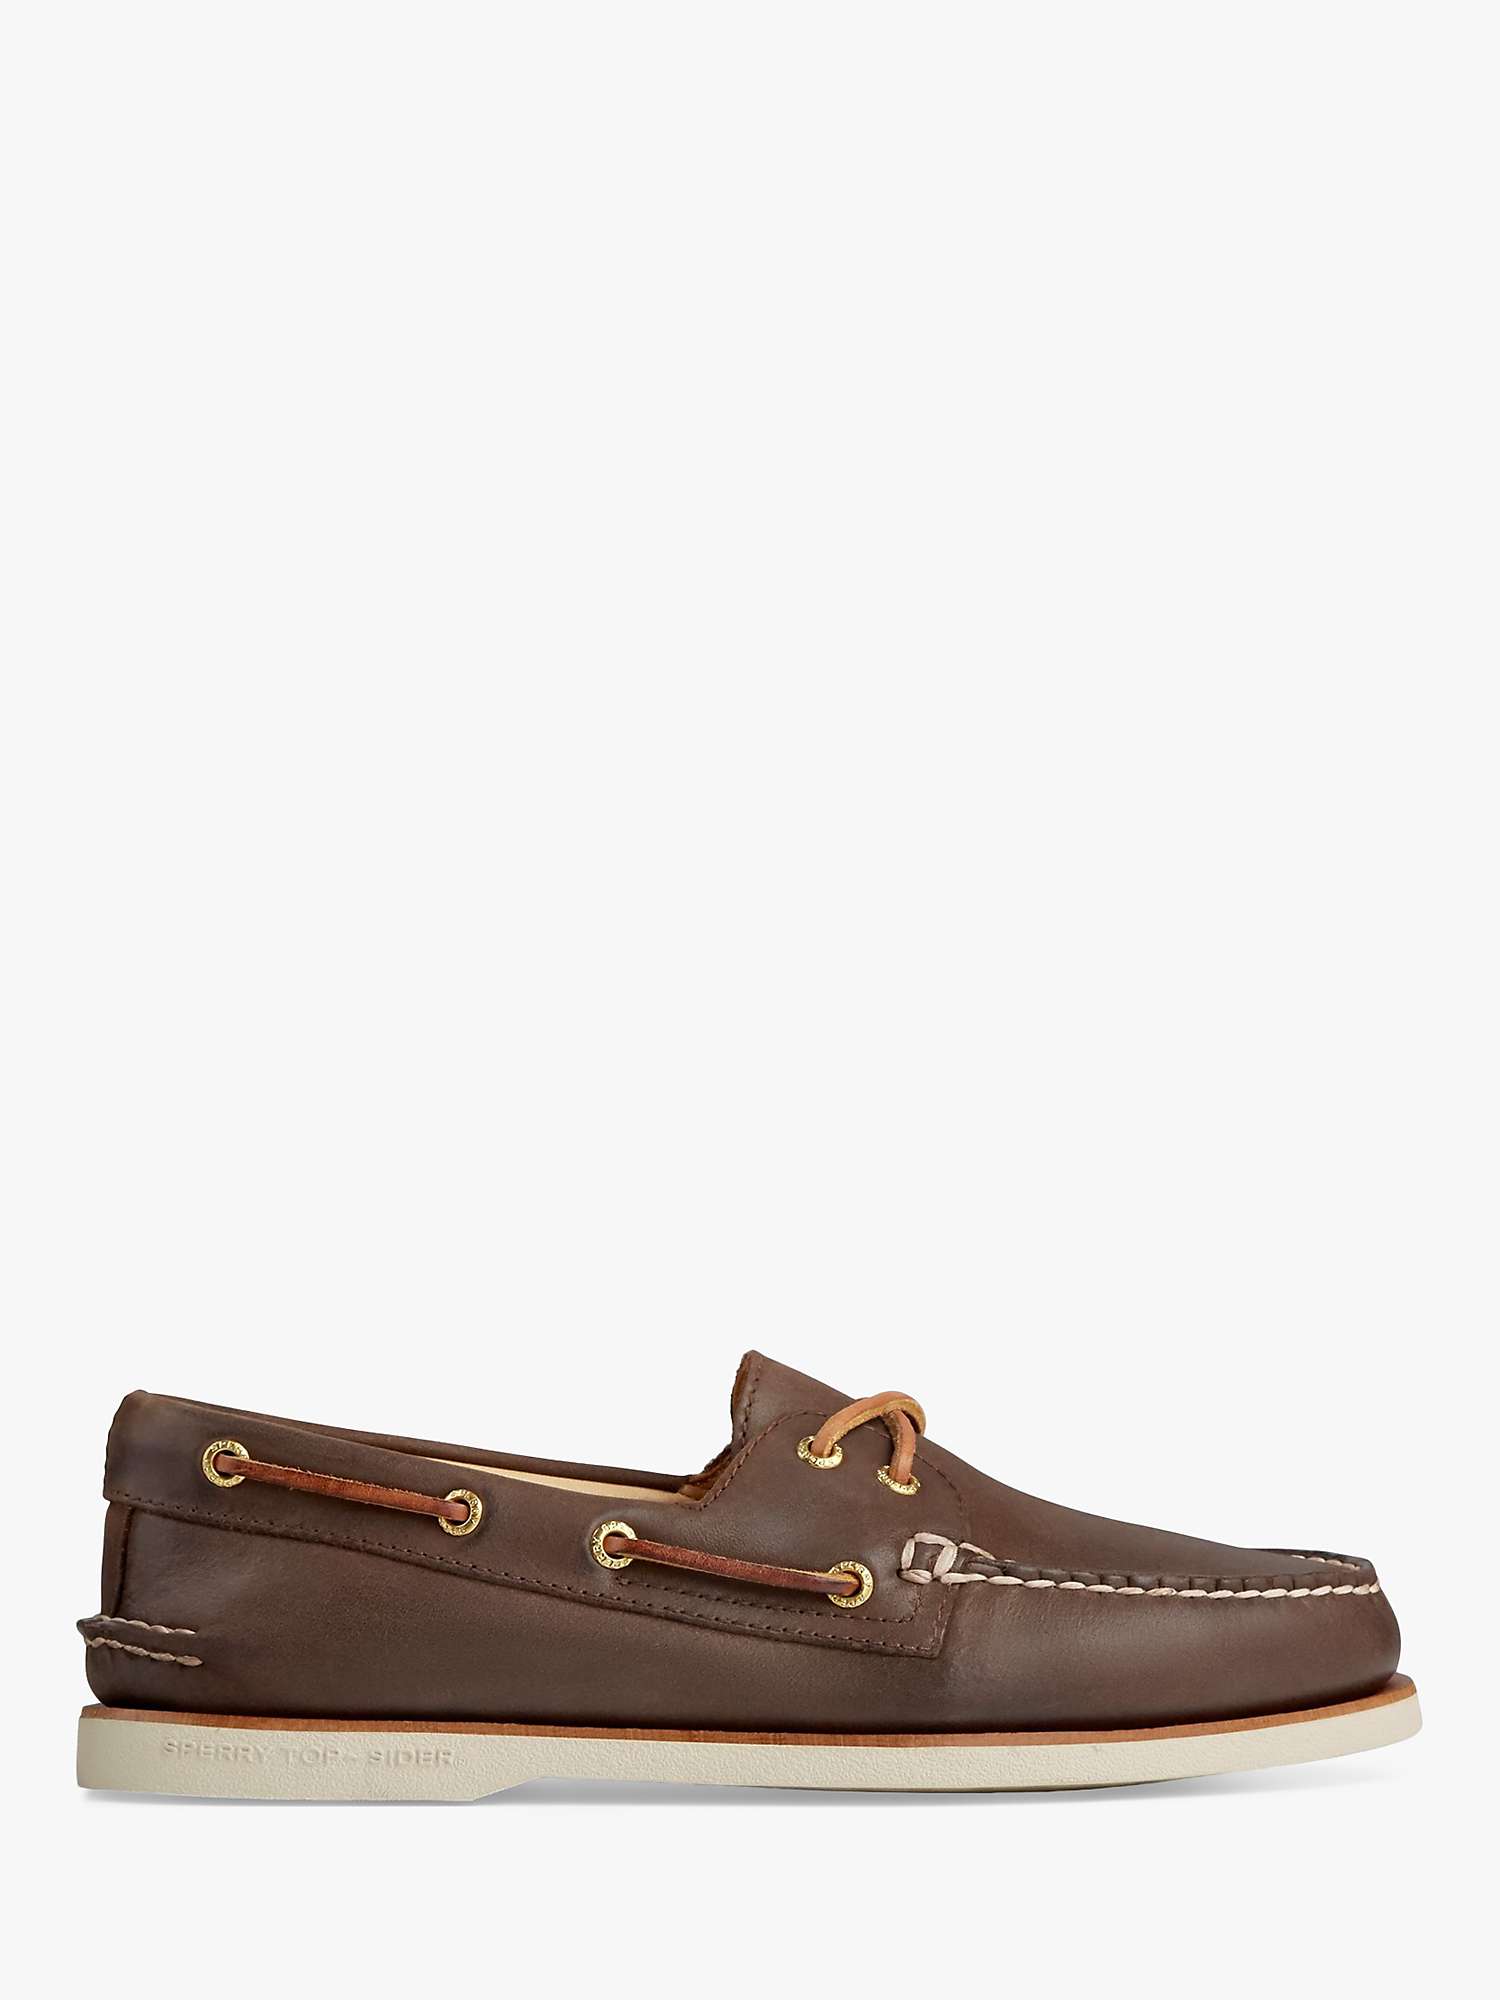 Buy Sperry Gold Cup Authentic Original Leather Boat Shoes Online at johnlewis.com